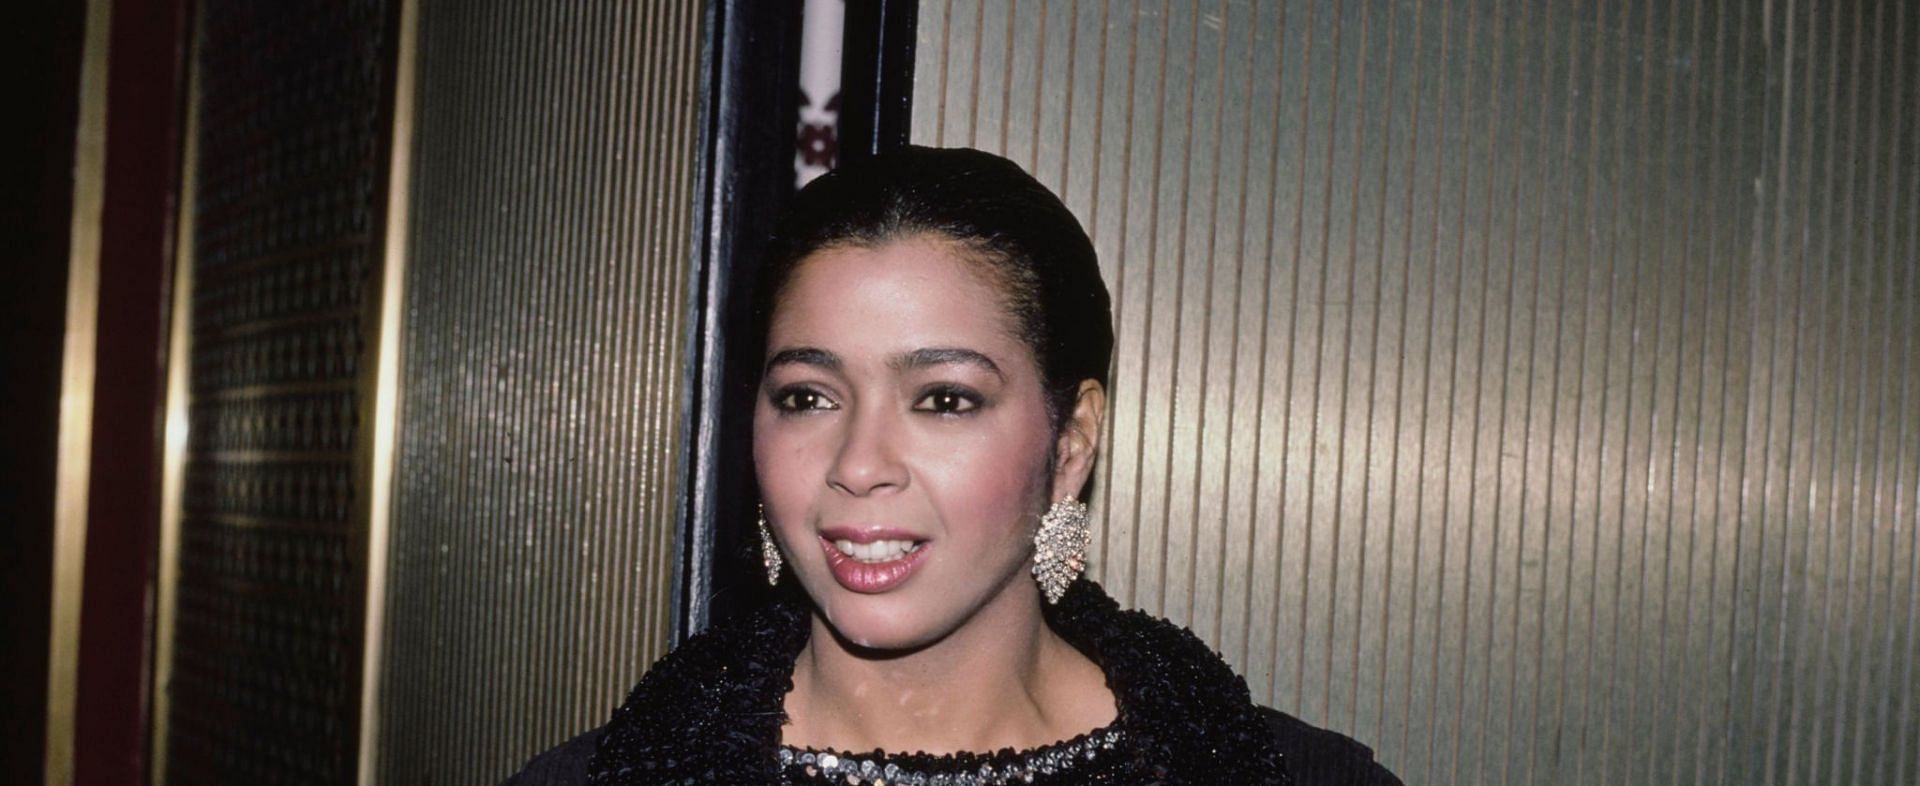 Irene Cara garnered immense recognition as a singer and actress in the 1980s (Image via Getty Images)